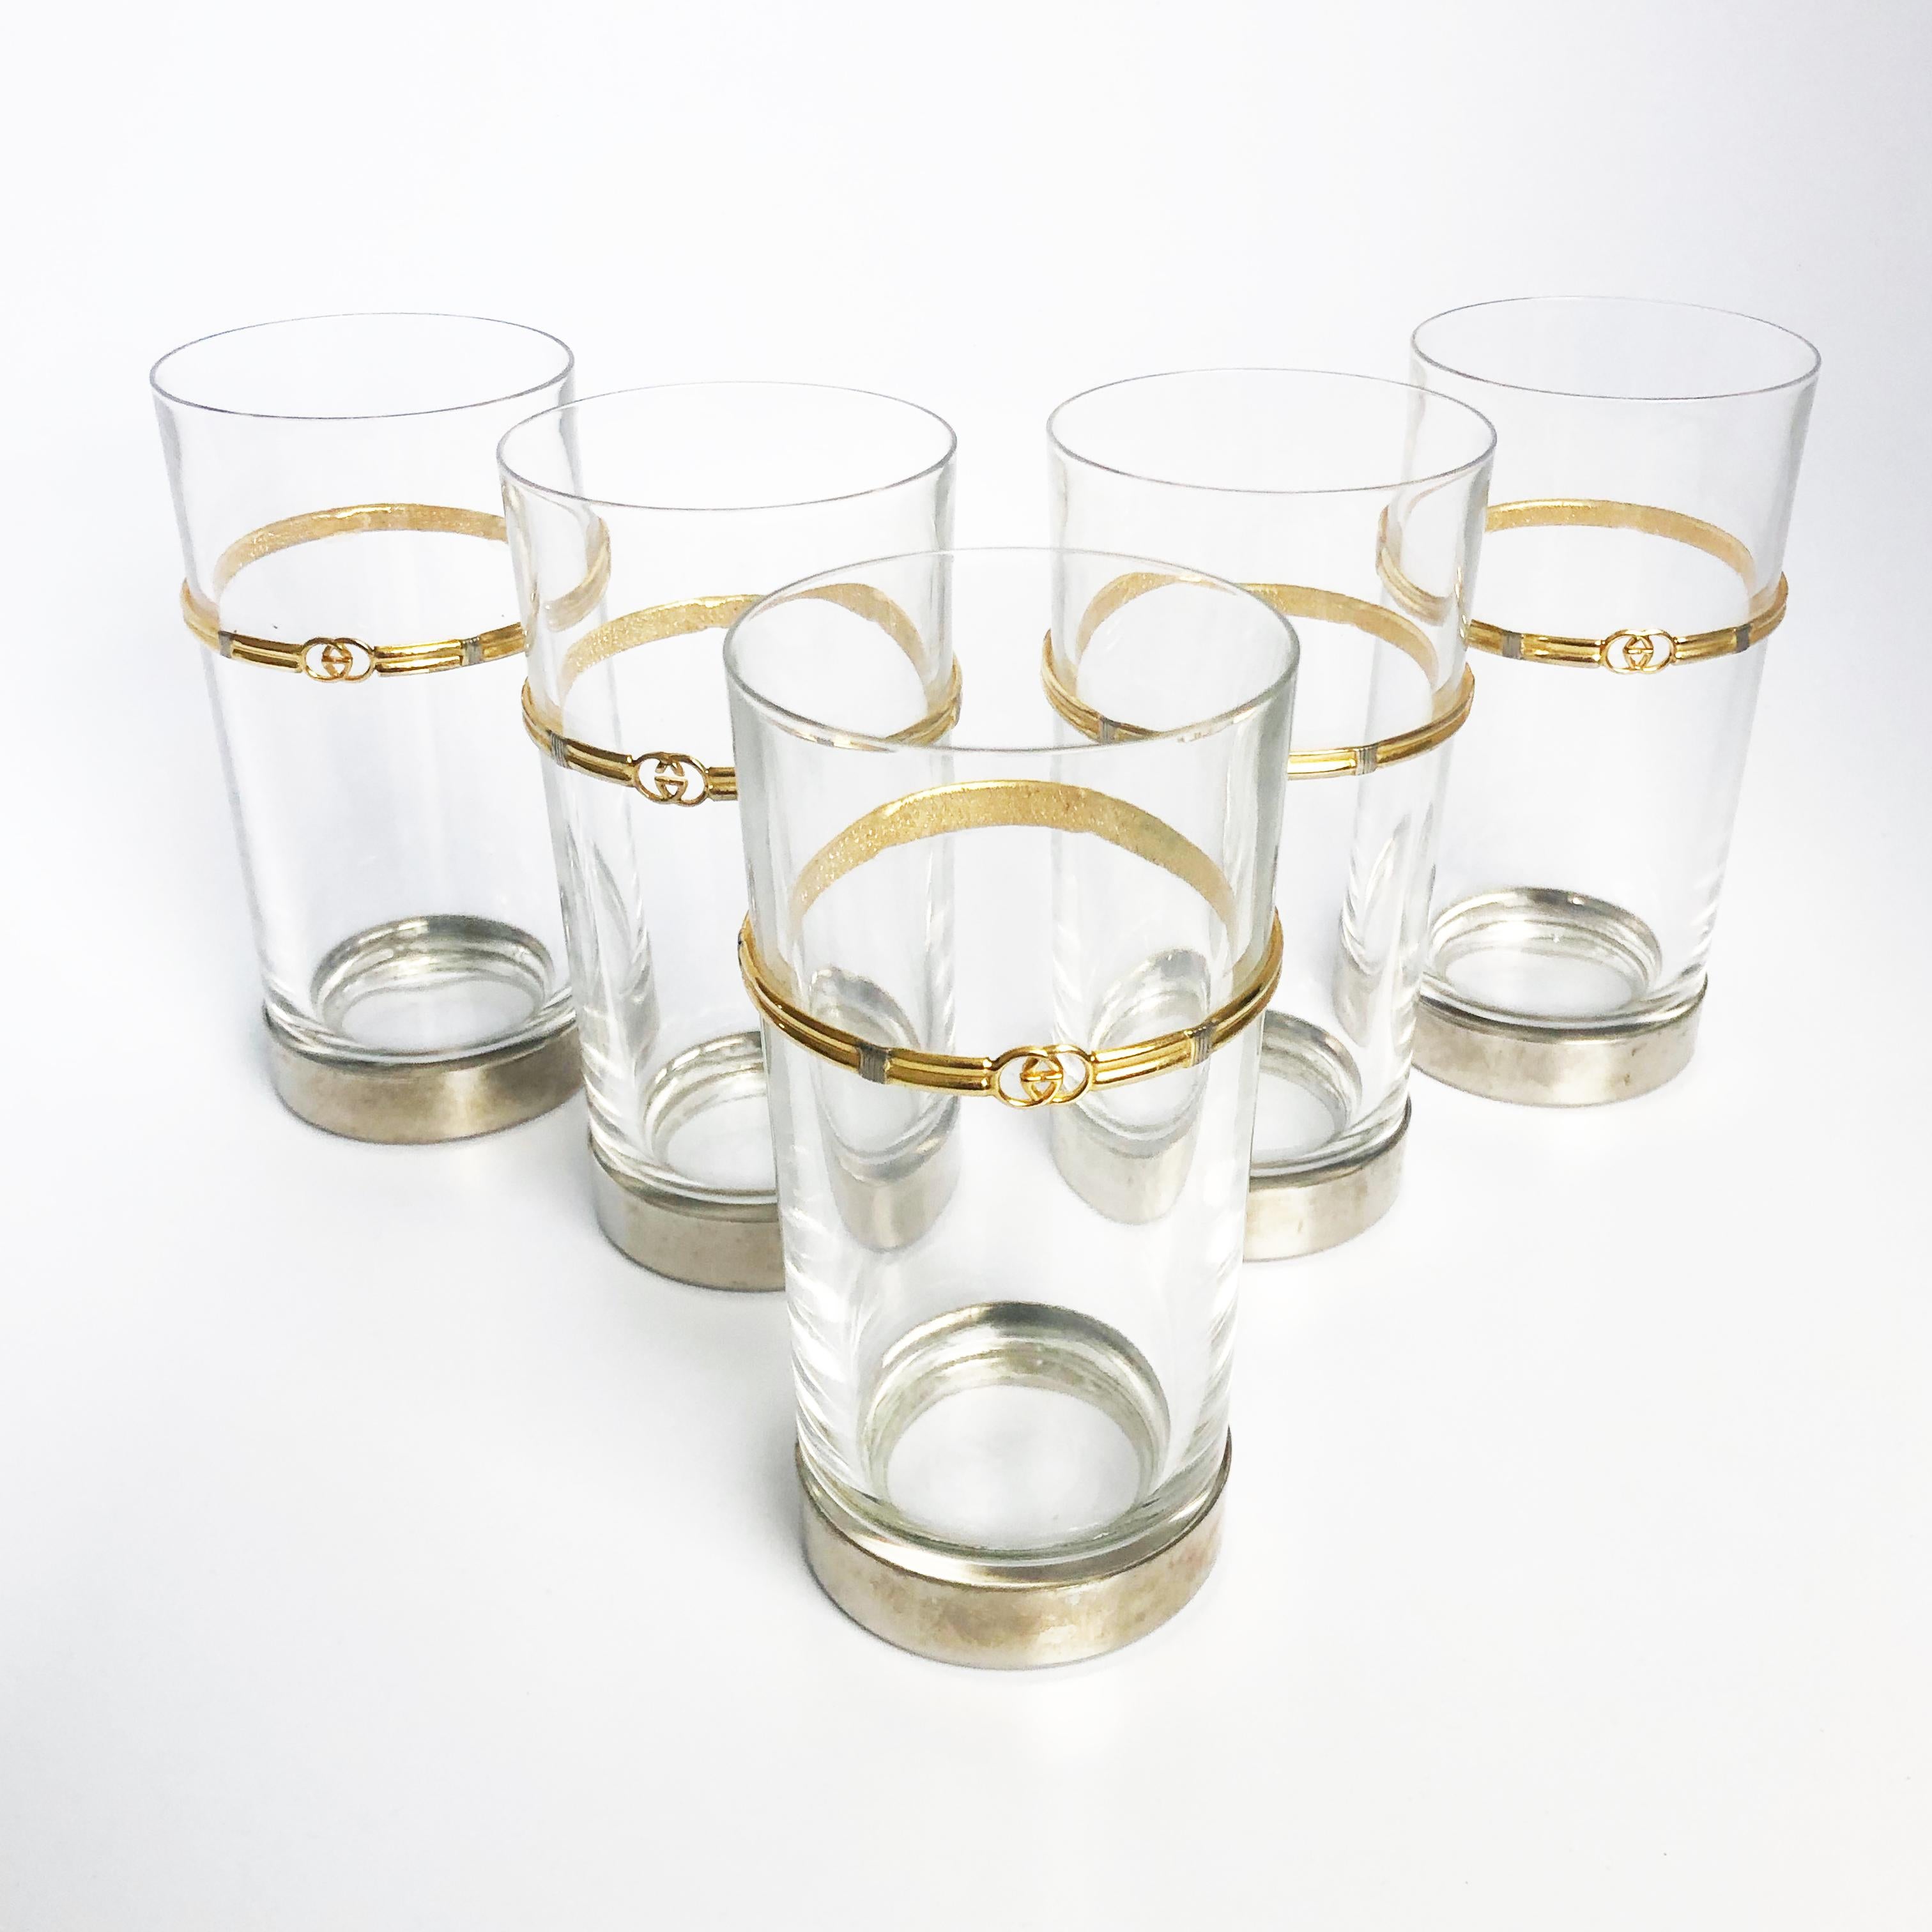 Entertain in style with this Gucci Barware Set (five) Crystal High Ball or Cocktail Glasses with Gold GG logo and silver plated bases.  One super rare set, likely made in the late 70s.  Each glass measures appx 6in H x 2.5in D.  Preowned/vintage